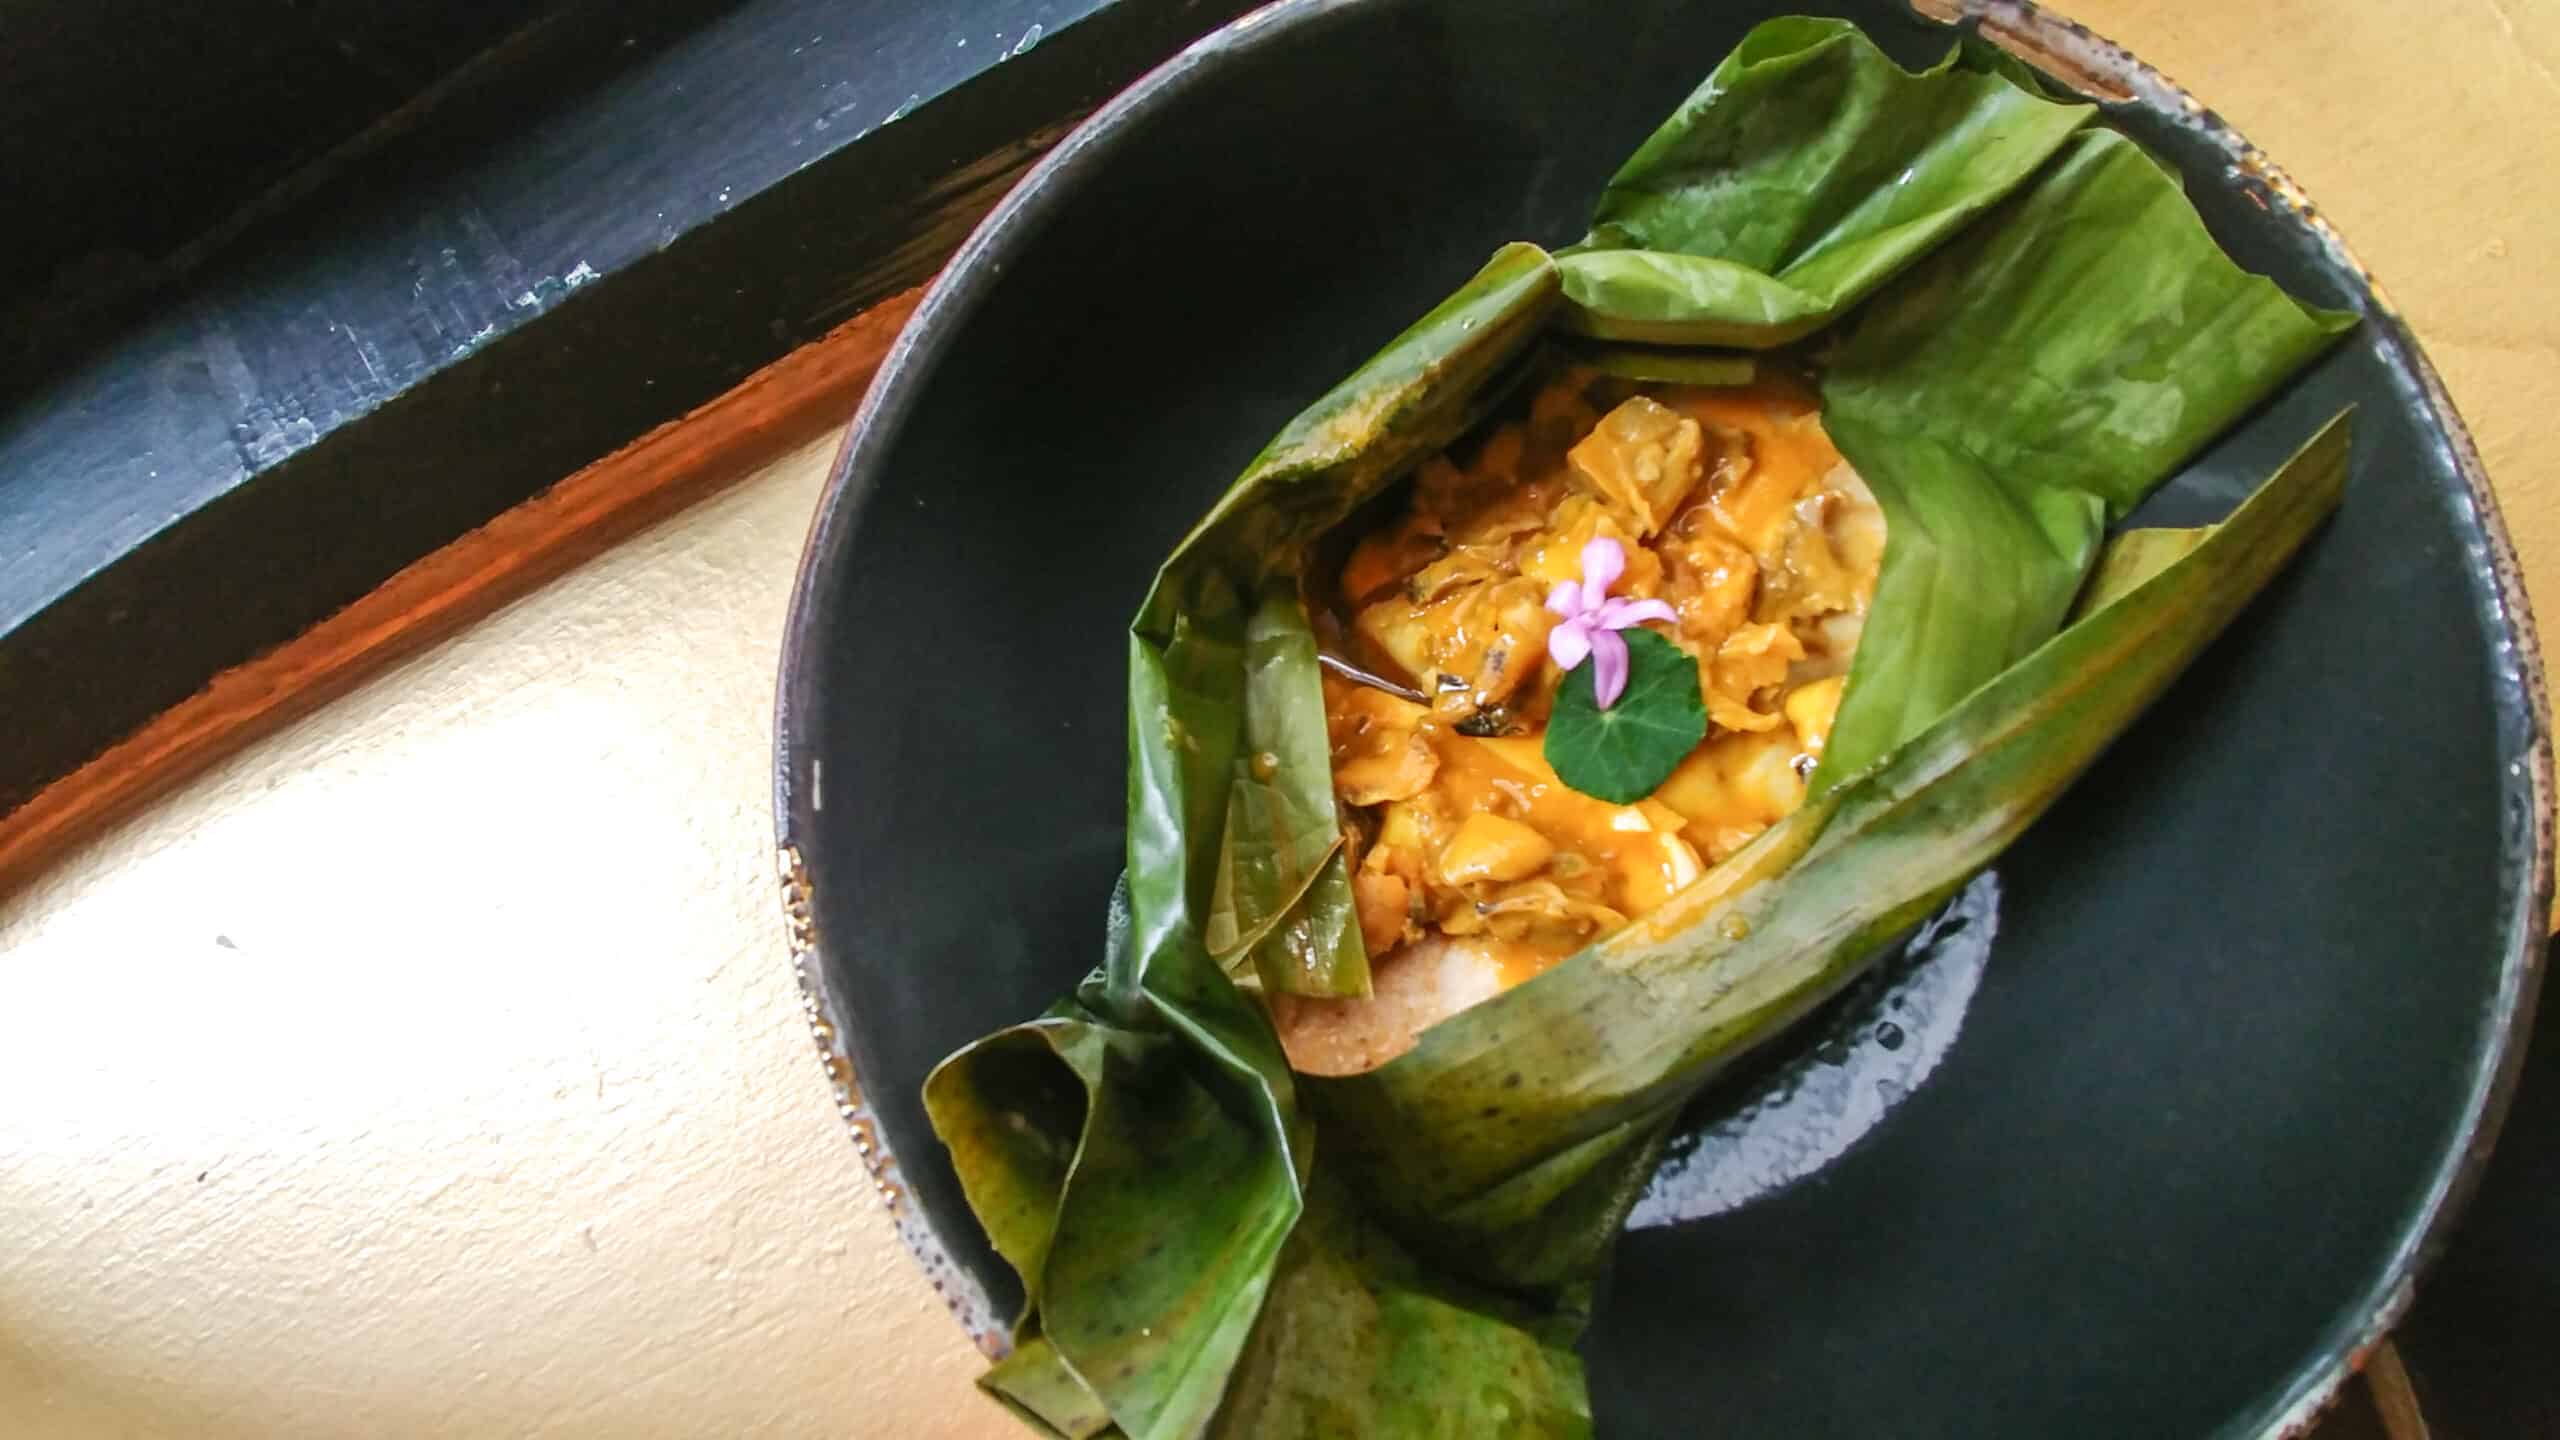 A bowl of food placed elegantly on top of a vibrant banana leaf, showcasing the culinary skills of one of the best restaurants in Bogota.